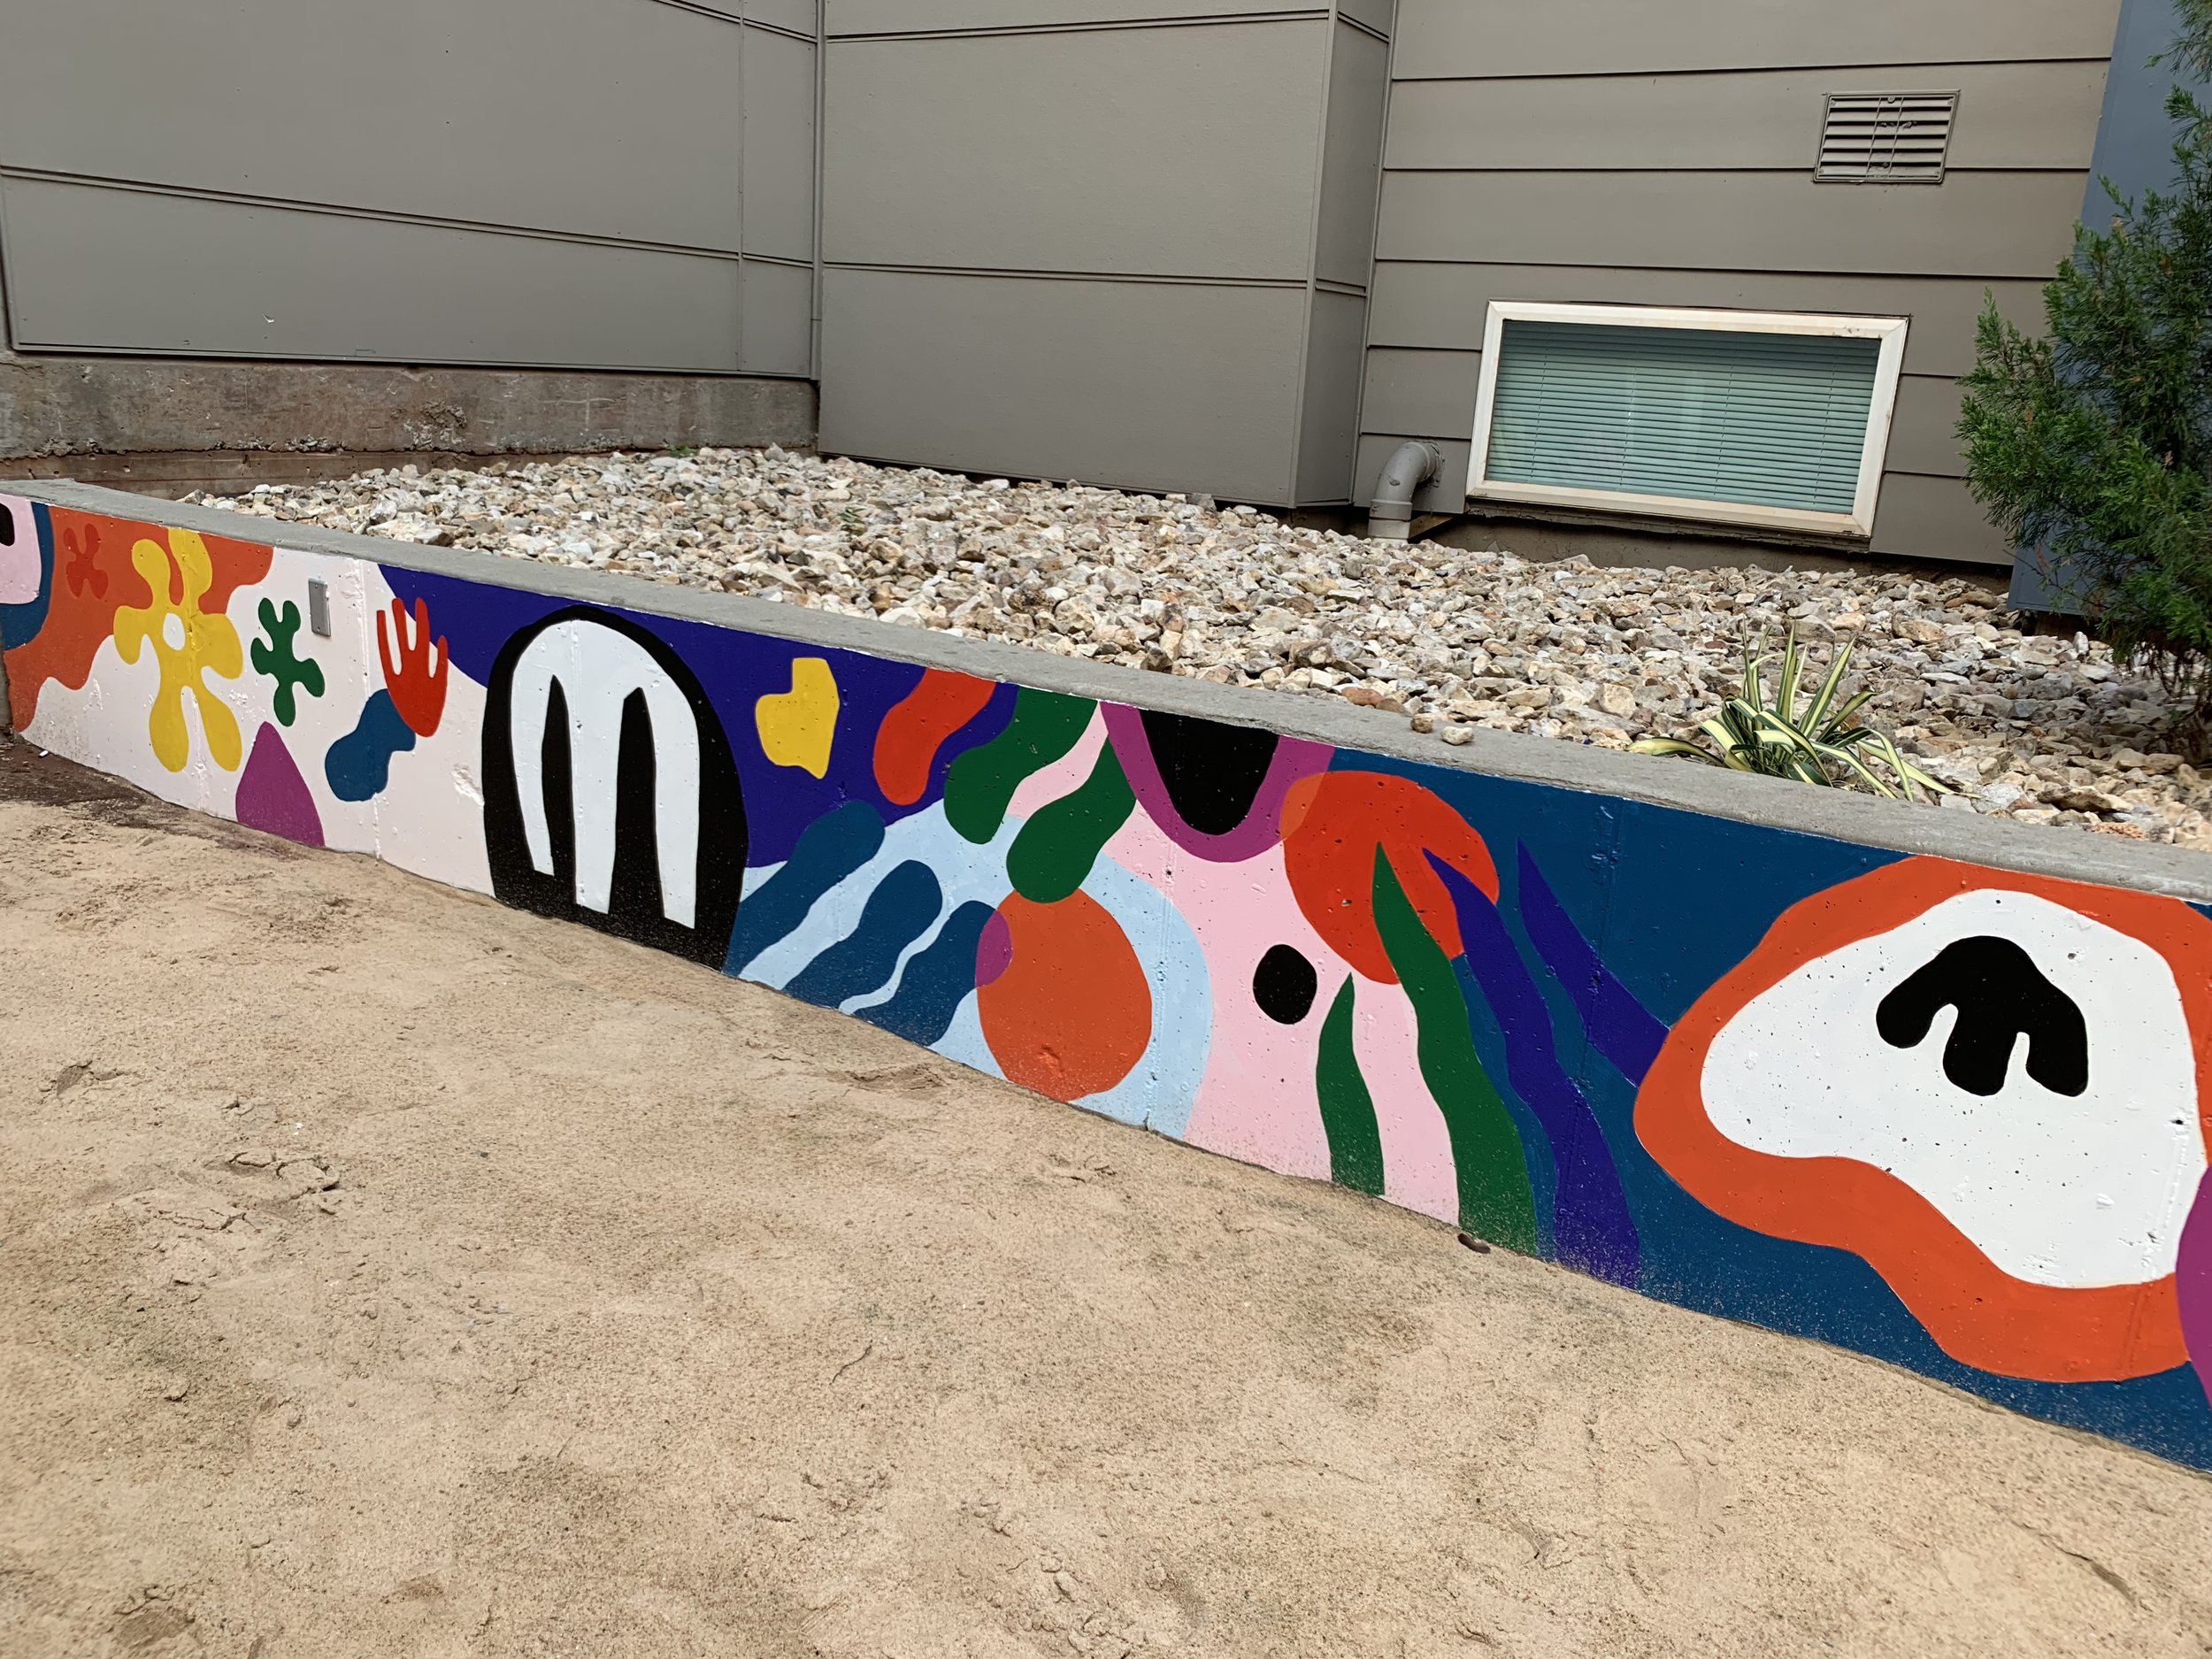  mural painting for Prime Place Apartments in Stillwater, Oklahoma 2022 